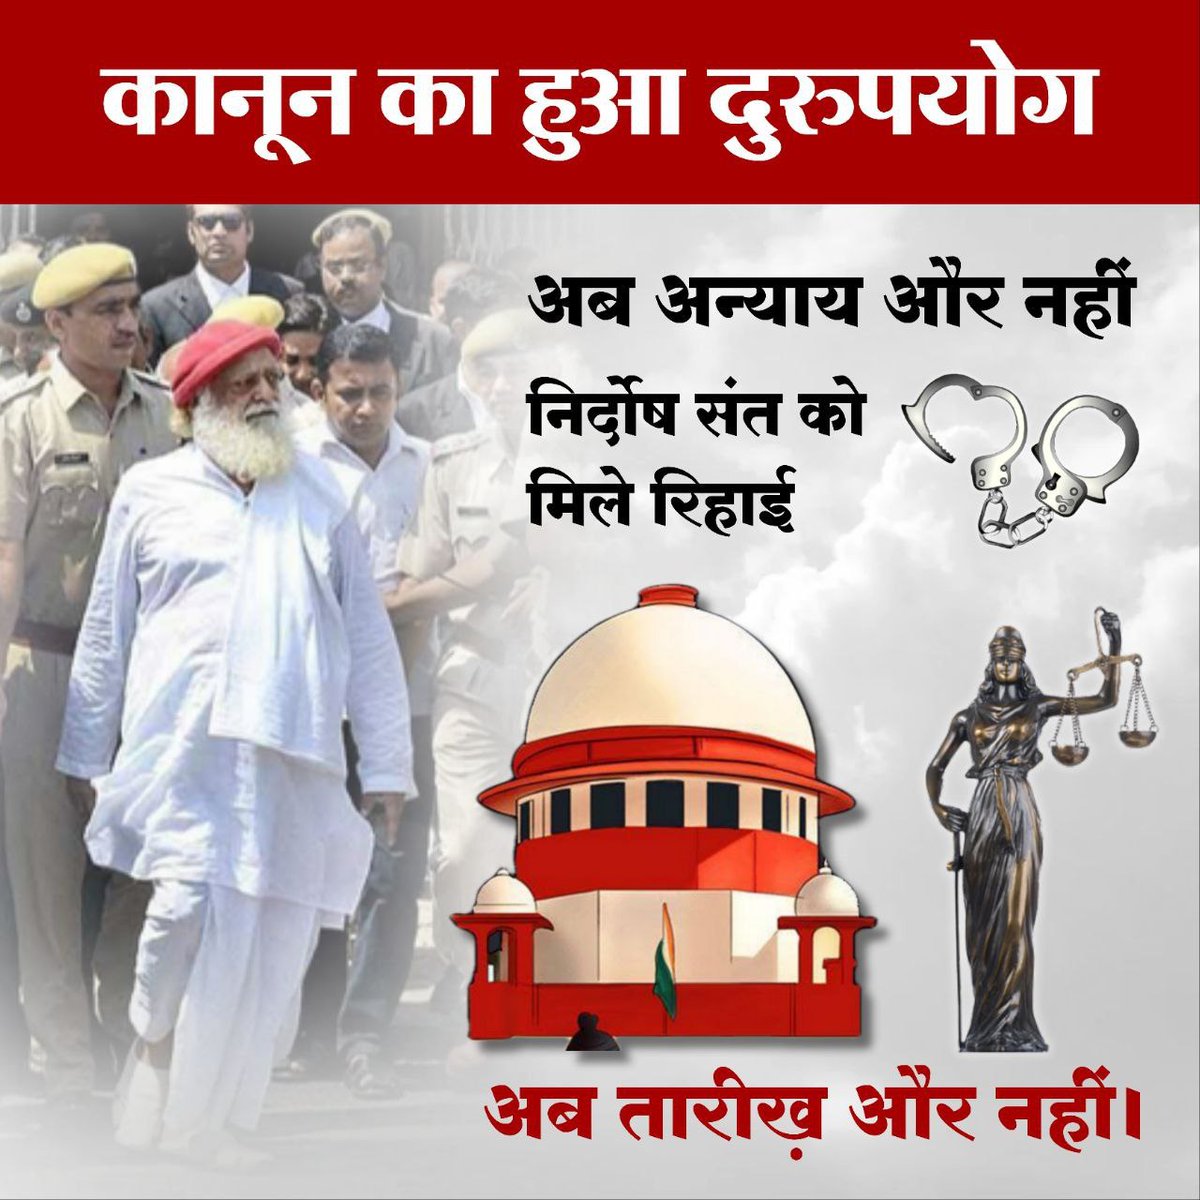 Sant Shri Asharamji Bapu has been convicted under the POCSO Act, showcasing how a Hindu saint can be imprisoned without evidence. It has been 11 years of injustice; now it's time for Hindus to wake up. #25April_InjusticeDay